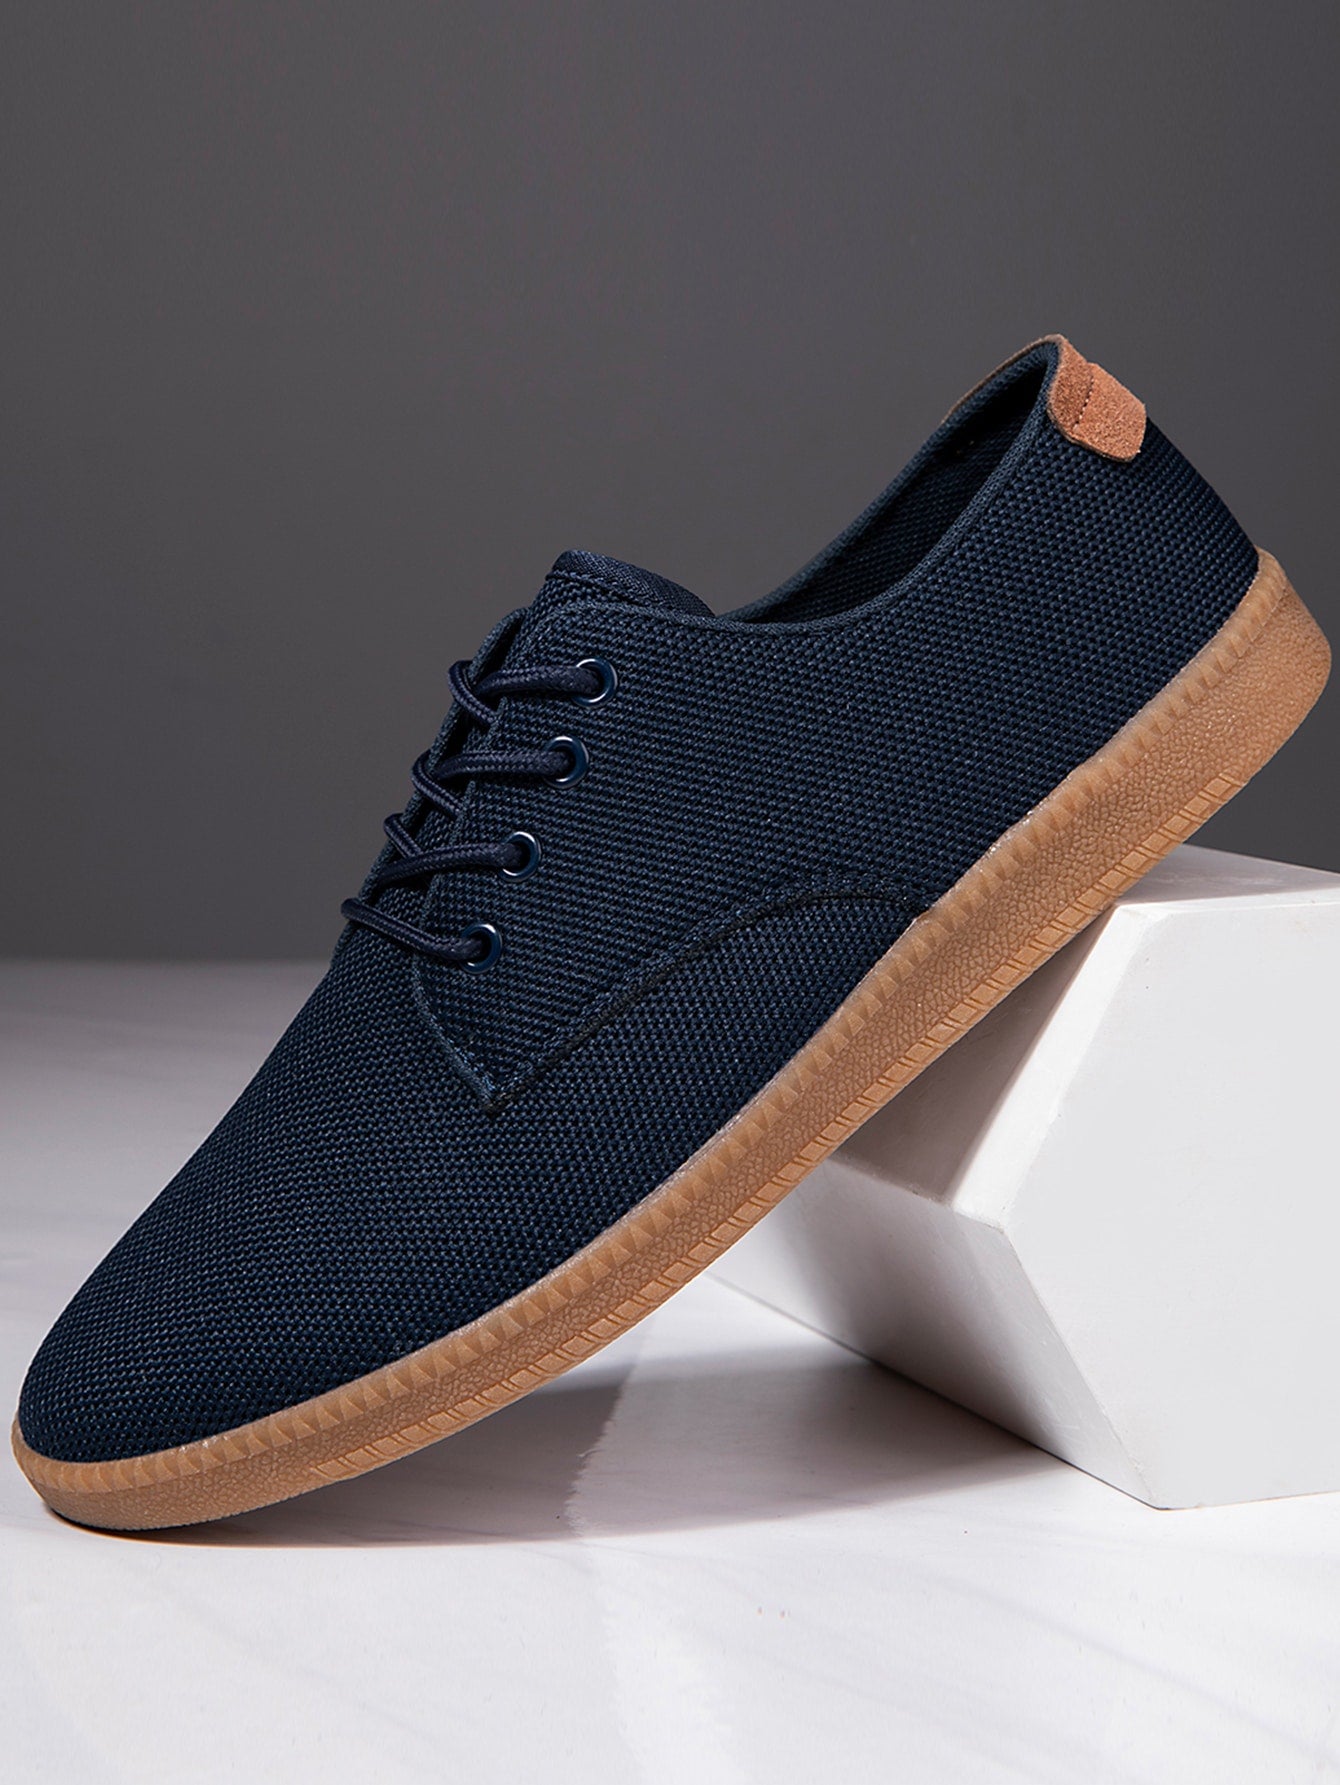 Mens Fashion Sneakers Casual Shoes Minimalist Oxfords Slip On Flat Shoes Workout Breathable Loafers Business Dress Shoes